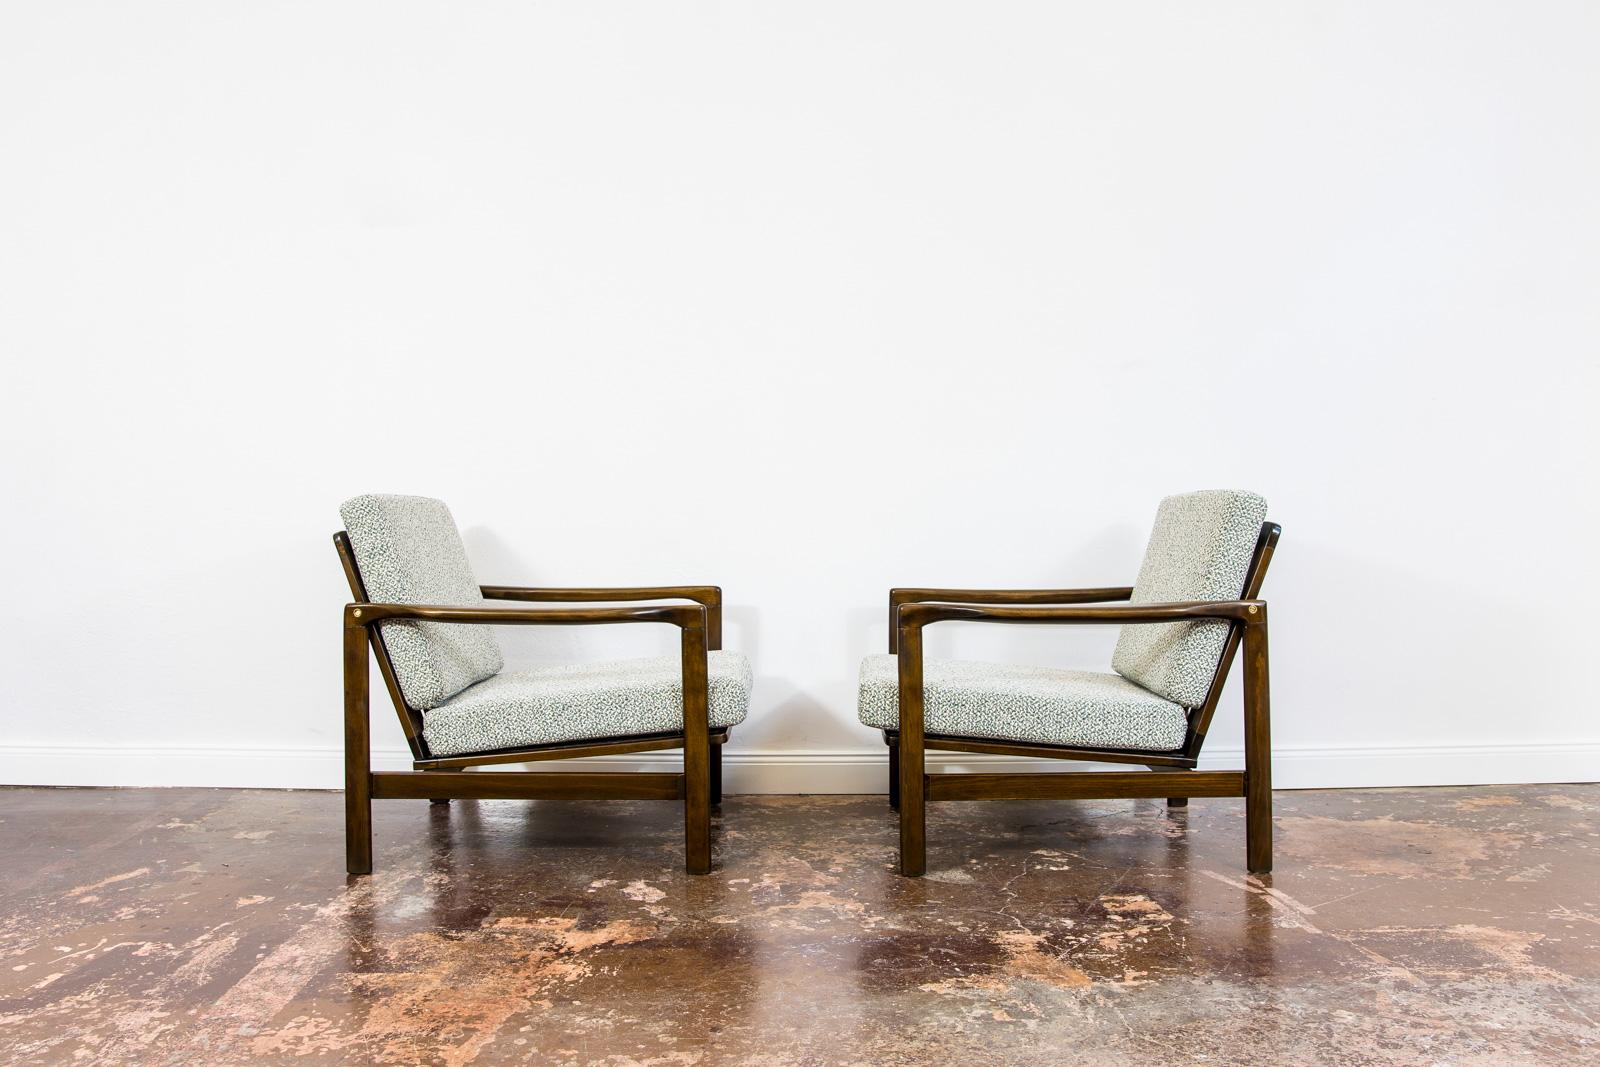 Polish Customizable Pair Of Mid Century Armchairs B7522 by Zenon Bączyk, 1960's For Sale